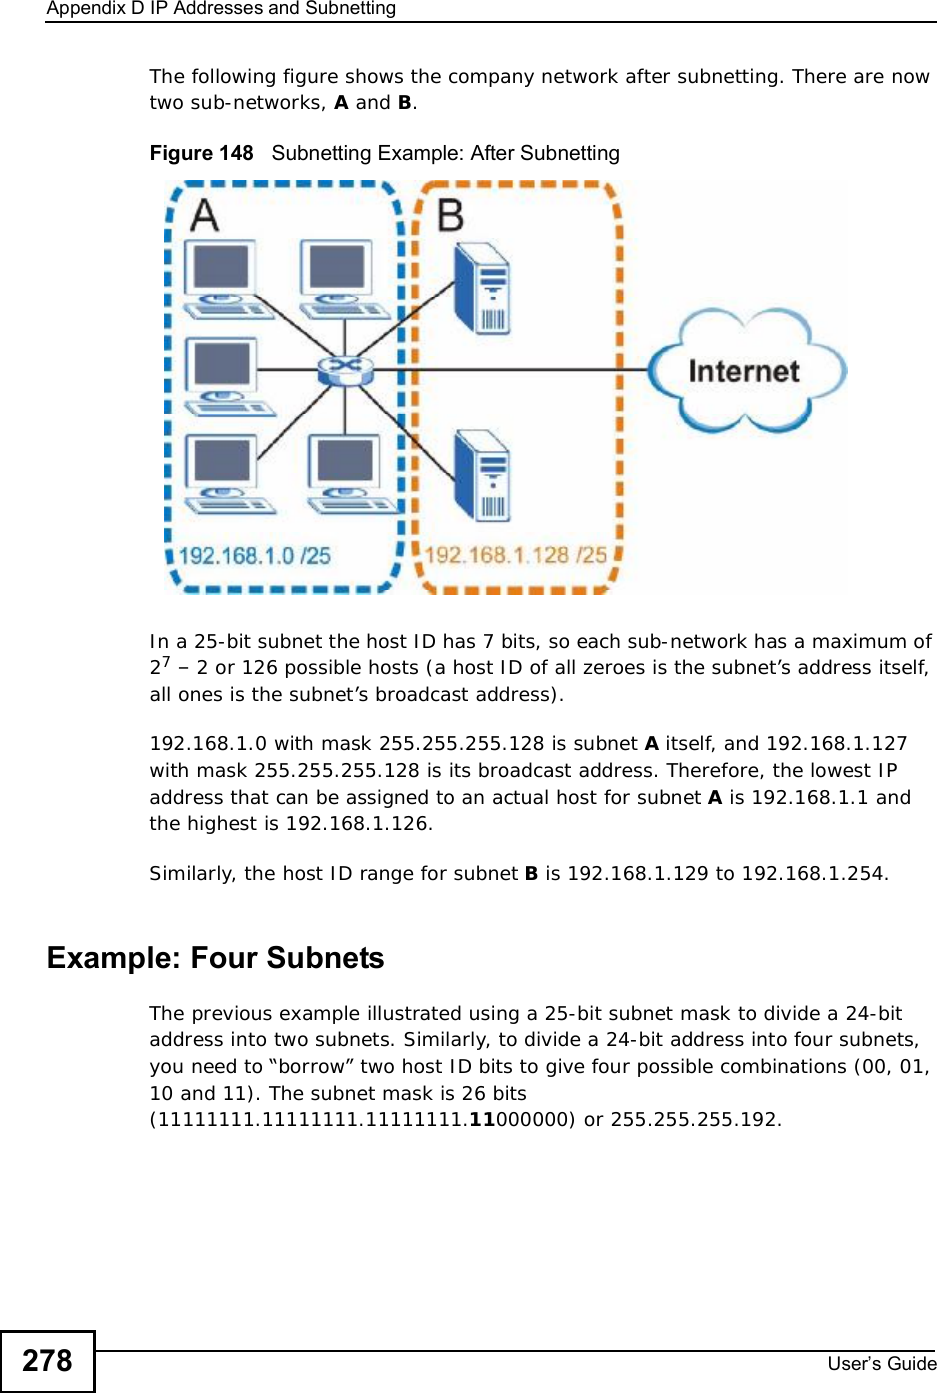 Appendix DIP Addresses and SubnettingUser s Guide278The following figure shows the company network after subnetting. There are now two sub-networks, A and B.Figure 148   Subnetting Example: After SubnettingIn a 25-bit subnet the host ID has 7 bits, so each sub-network has a maximum of 27 – 2 or 126 possible hosts (a host ID of all zeroes is the subnet’s address itself, all ones is the subnet’s broadcast address).192.168.1.0 with mask 255.255.255.128 is subnet A itself, and 192.168.1.127 with mask 255.255.255.128 is its broadcast address. Therefore, the lowest IP address that can be assigned to an actual host for subnet A is 192.168.1.1 and the highest is 192.168.1.126. Similarly, the host ID range for subnet B is 192.168.1.129 to 192.168.1.254.Example: Four Subnets The previous example illustrated using a 25-bit subnet mask to divide a 24-bit address into two subnets. Similarly, to divide a 24-bit address into four subnets, you need to “borrow” two host ID bits to give four possible combinations (00, 01, 10 and 11). The subnet mask is 26 bits (11111111.11111111.11111111.11000000) or 255.255.255.192. 